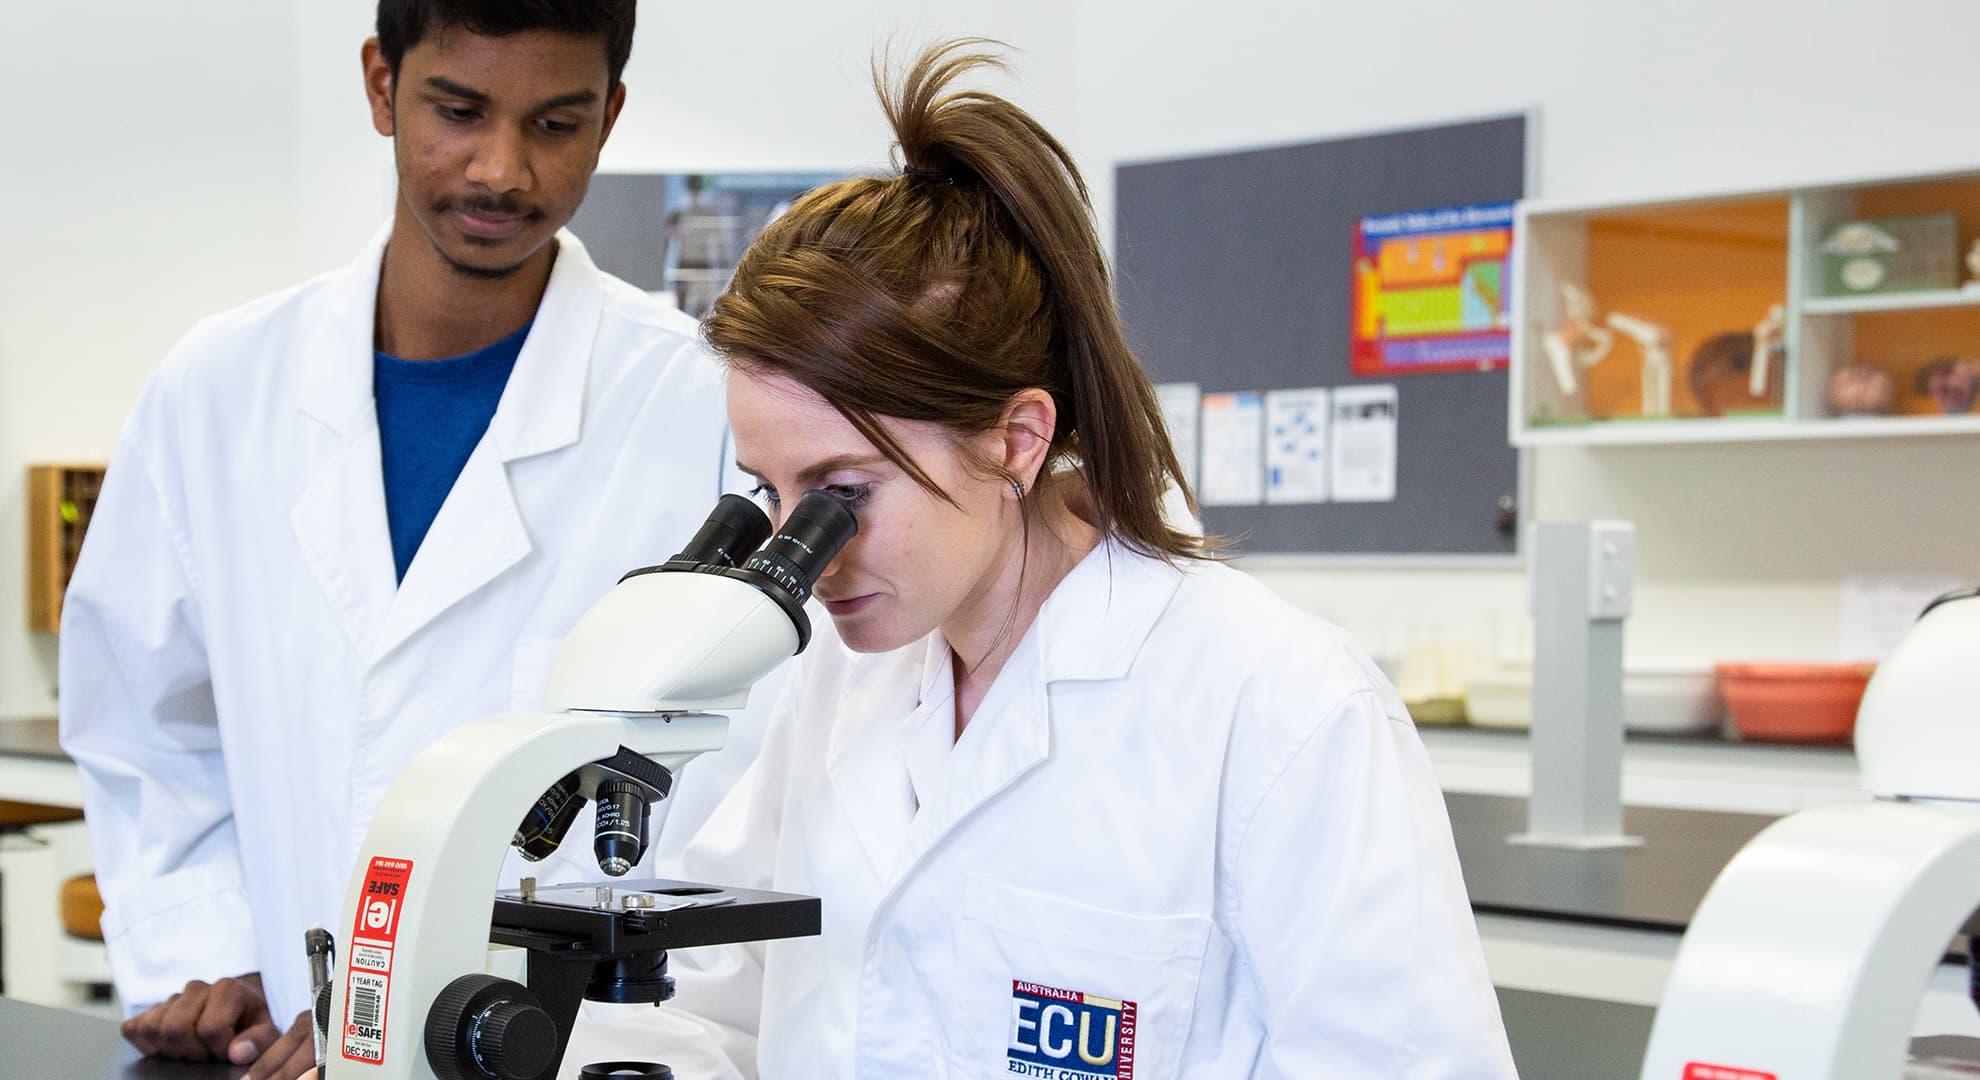 Two students in lab coats, one looking into a microscope.